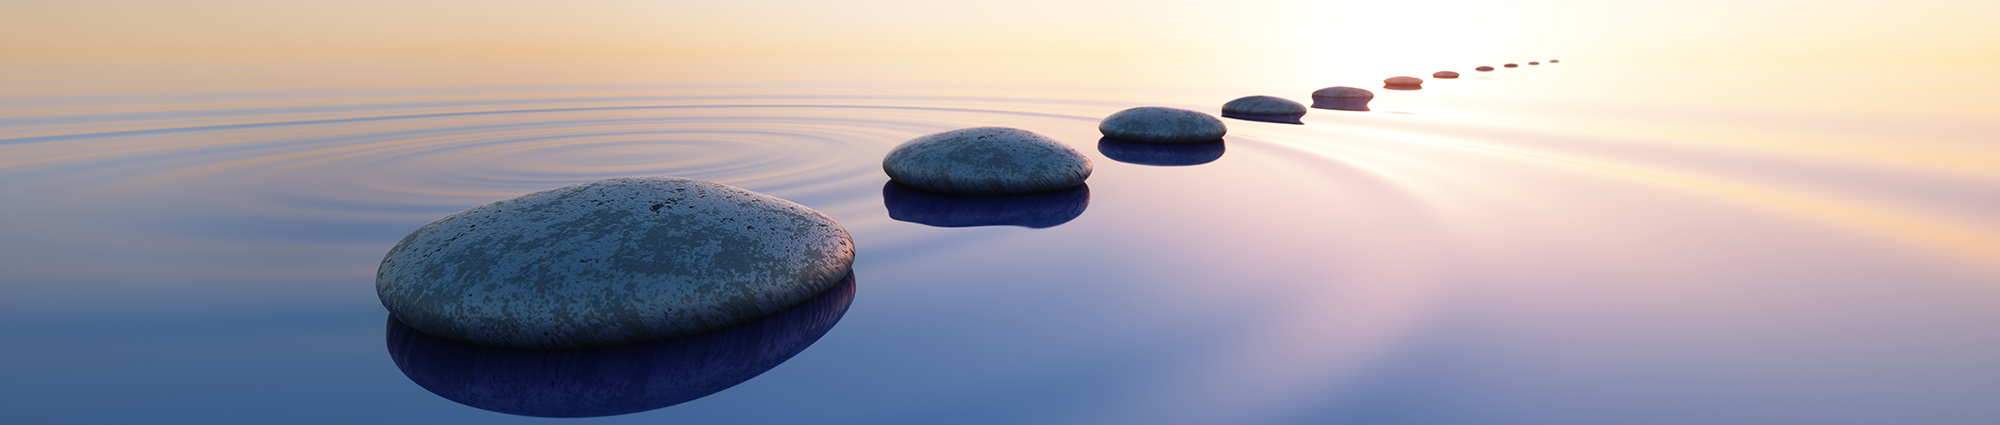 Row of stones in calm water in the wide ocean concept of meditation - 3D illustration